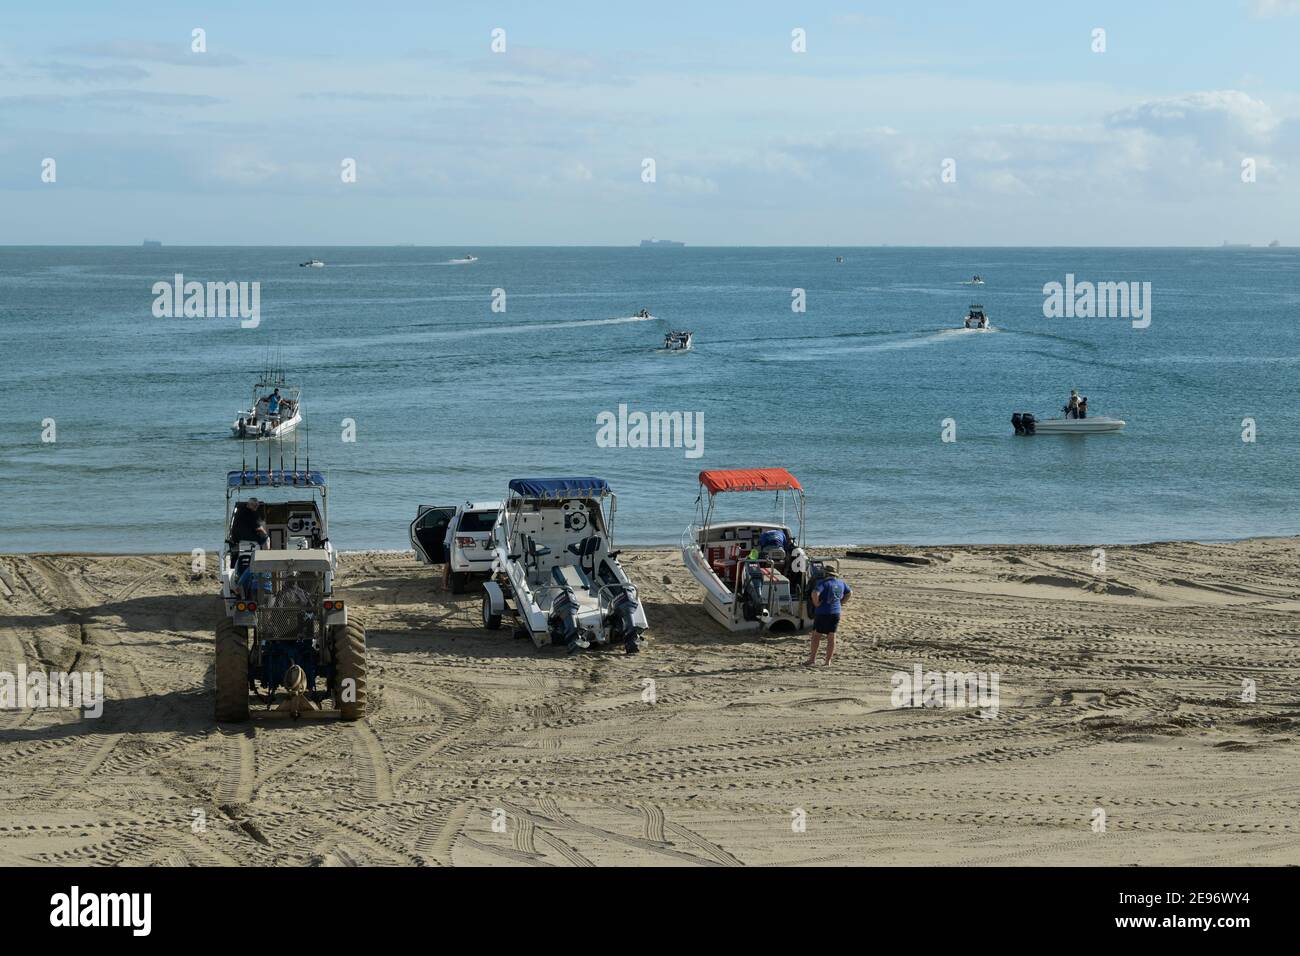 Sport fishing, boats on beach, Point beachfront, Durban, South Africa, beautiful landscape, people, motorboat, catch fish, saltwater angling, seaside Stock Photo